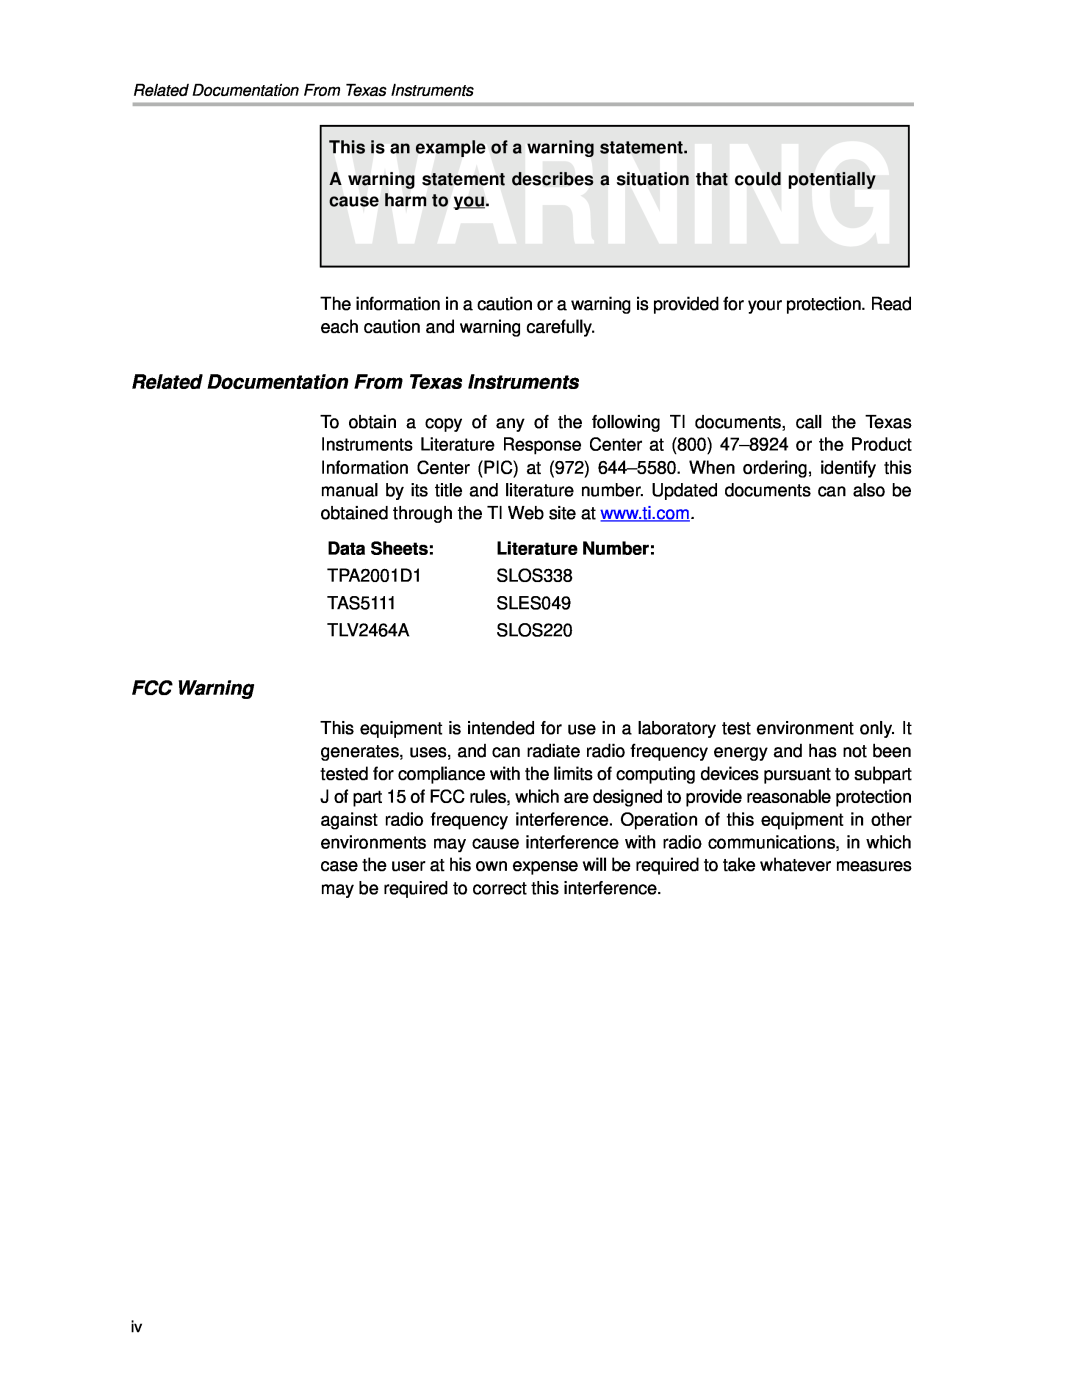 Texas Instruments APA100 manual Related Documentation From Texas Instruments, FCC Warning, Data Sheets, Literature Number 